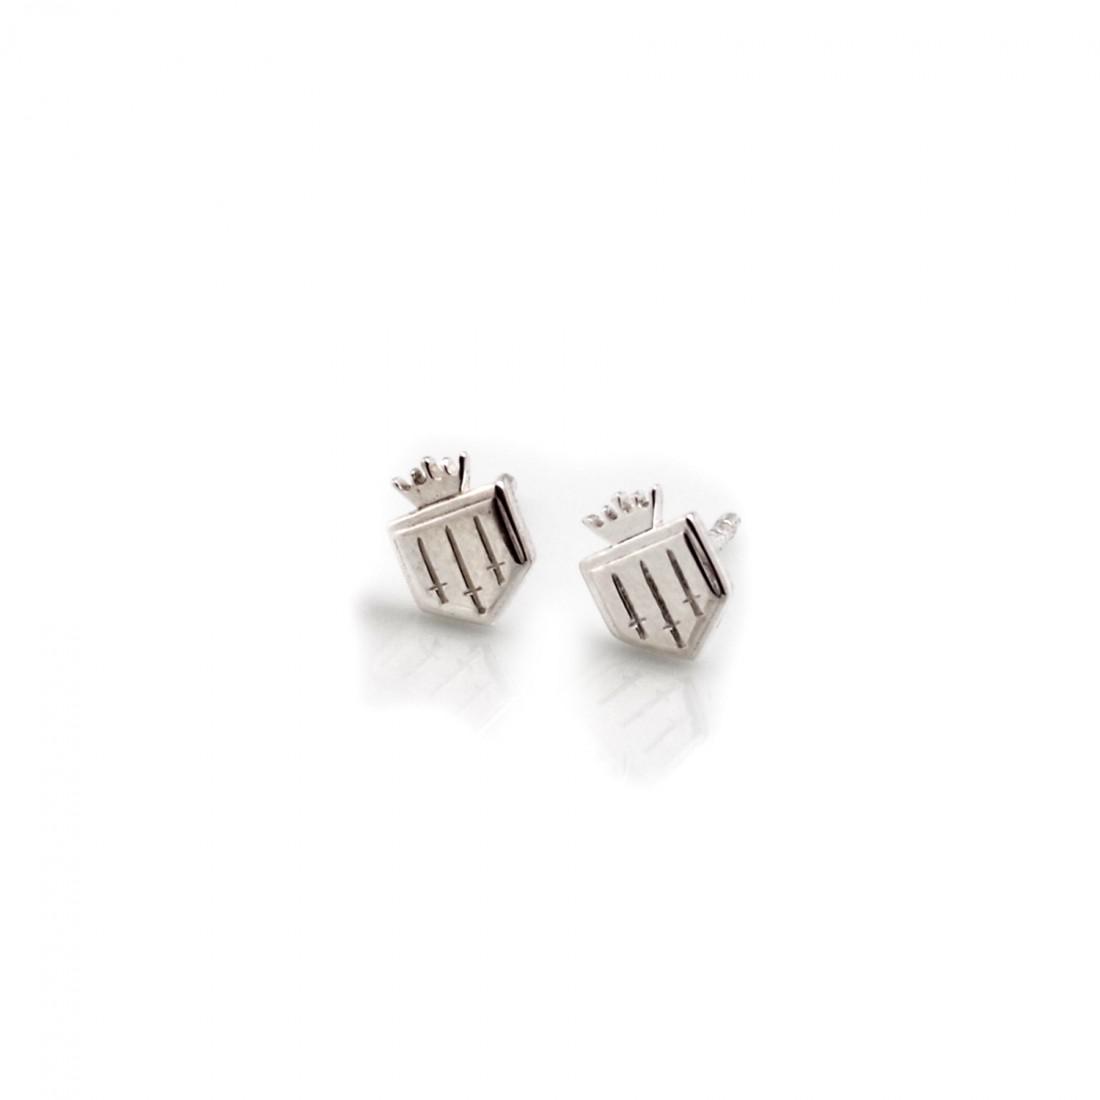 Exclusive Sterling Silver Fairfax & Favor Stud Earrings